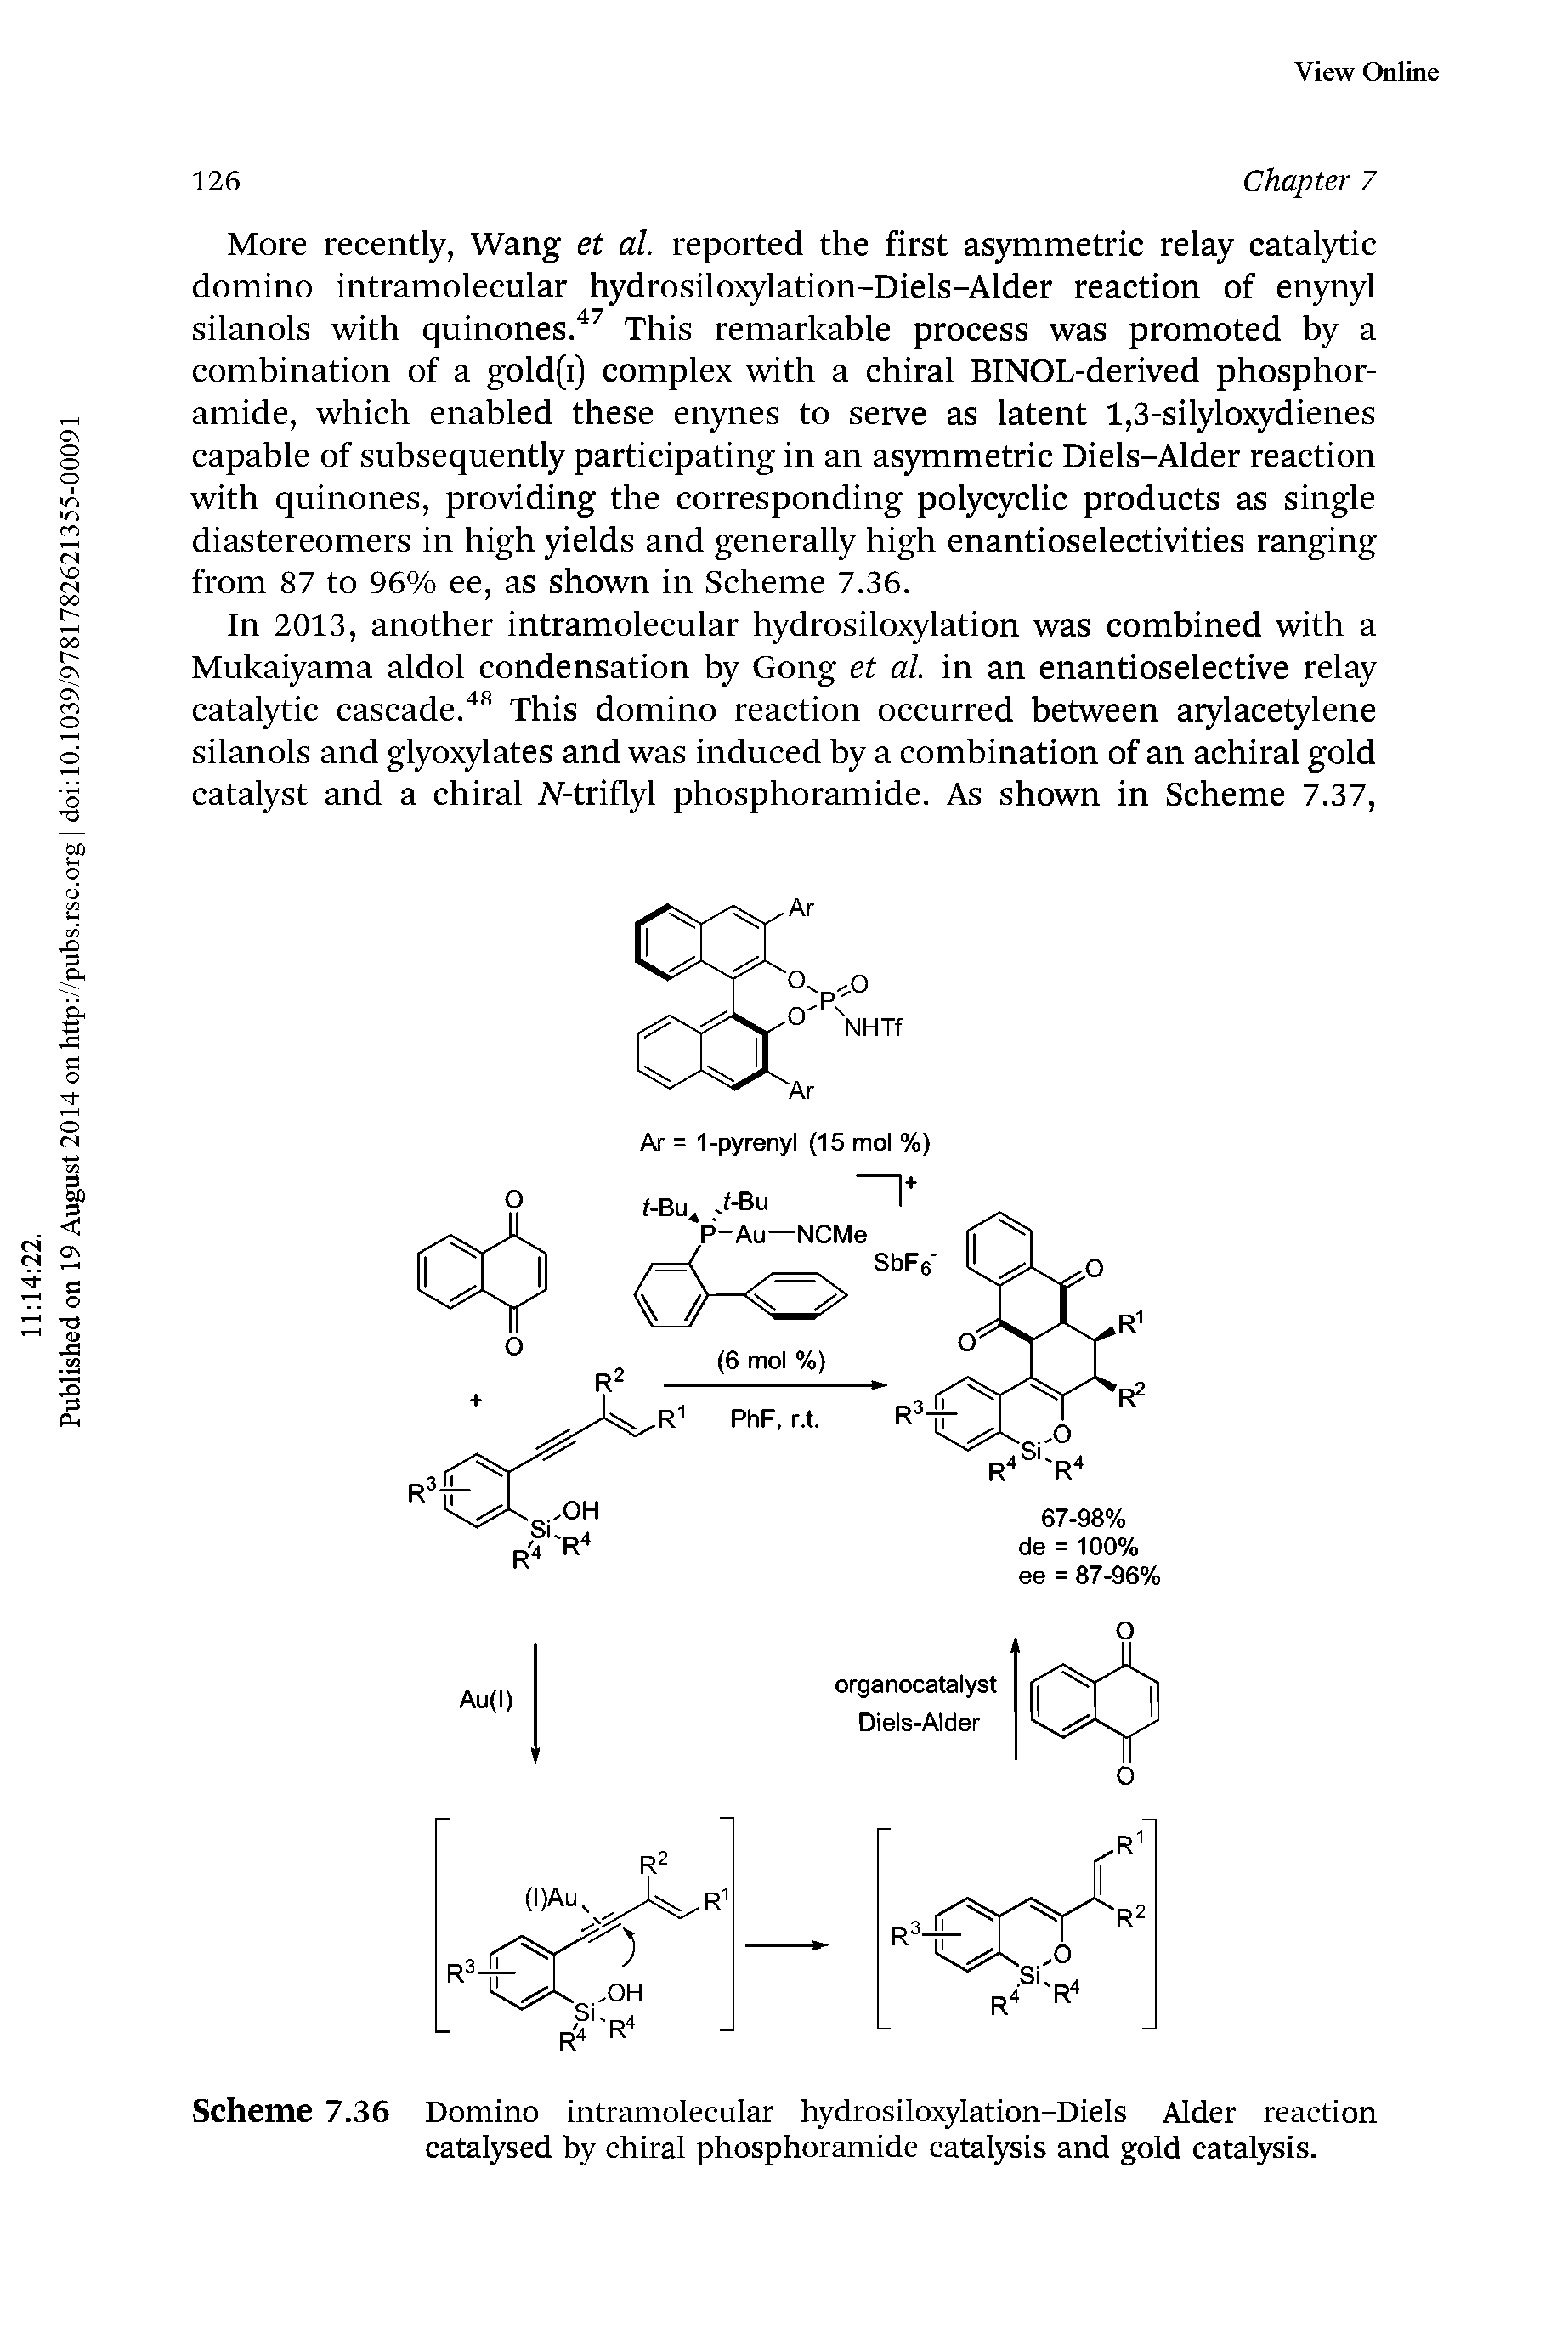 Scheme 7.36 Domino intramolecular hydrosiloxylation-Diels-Alder reaction catalysed by chiral phosphoramide catalysis and gold catalysis.